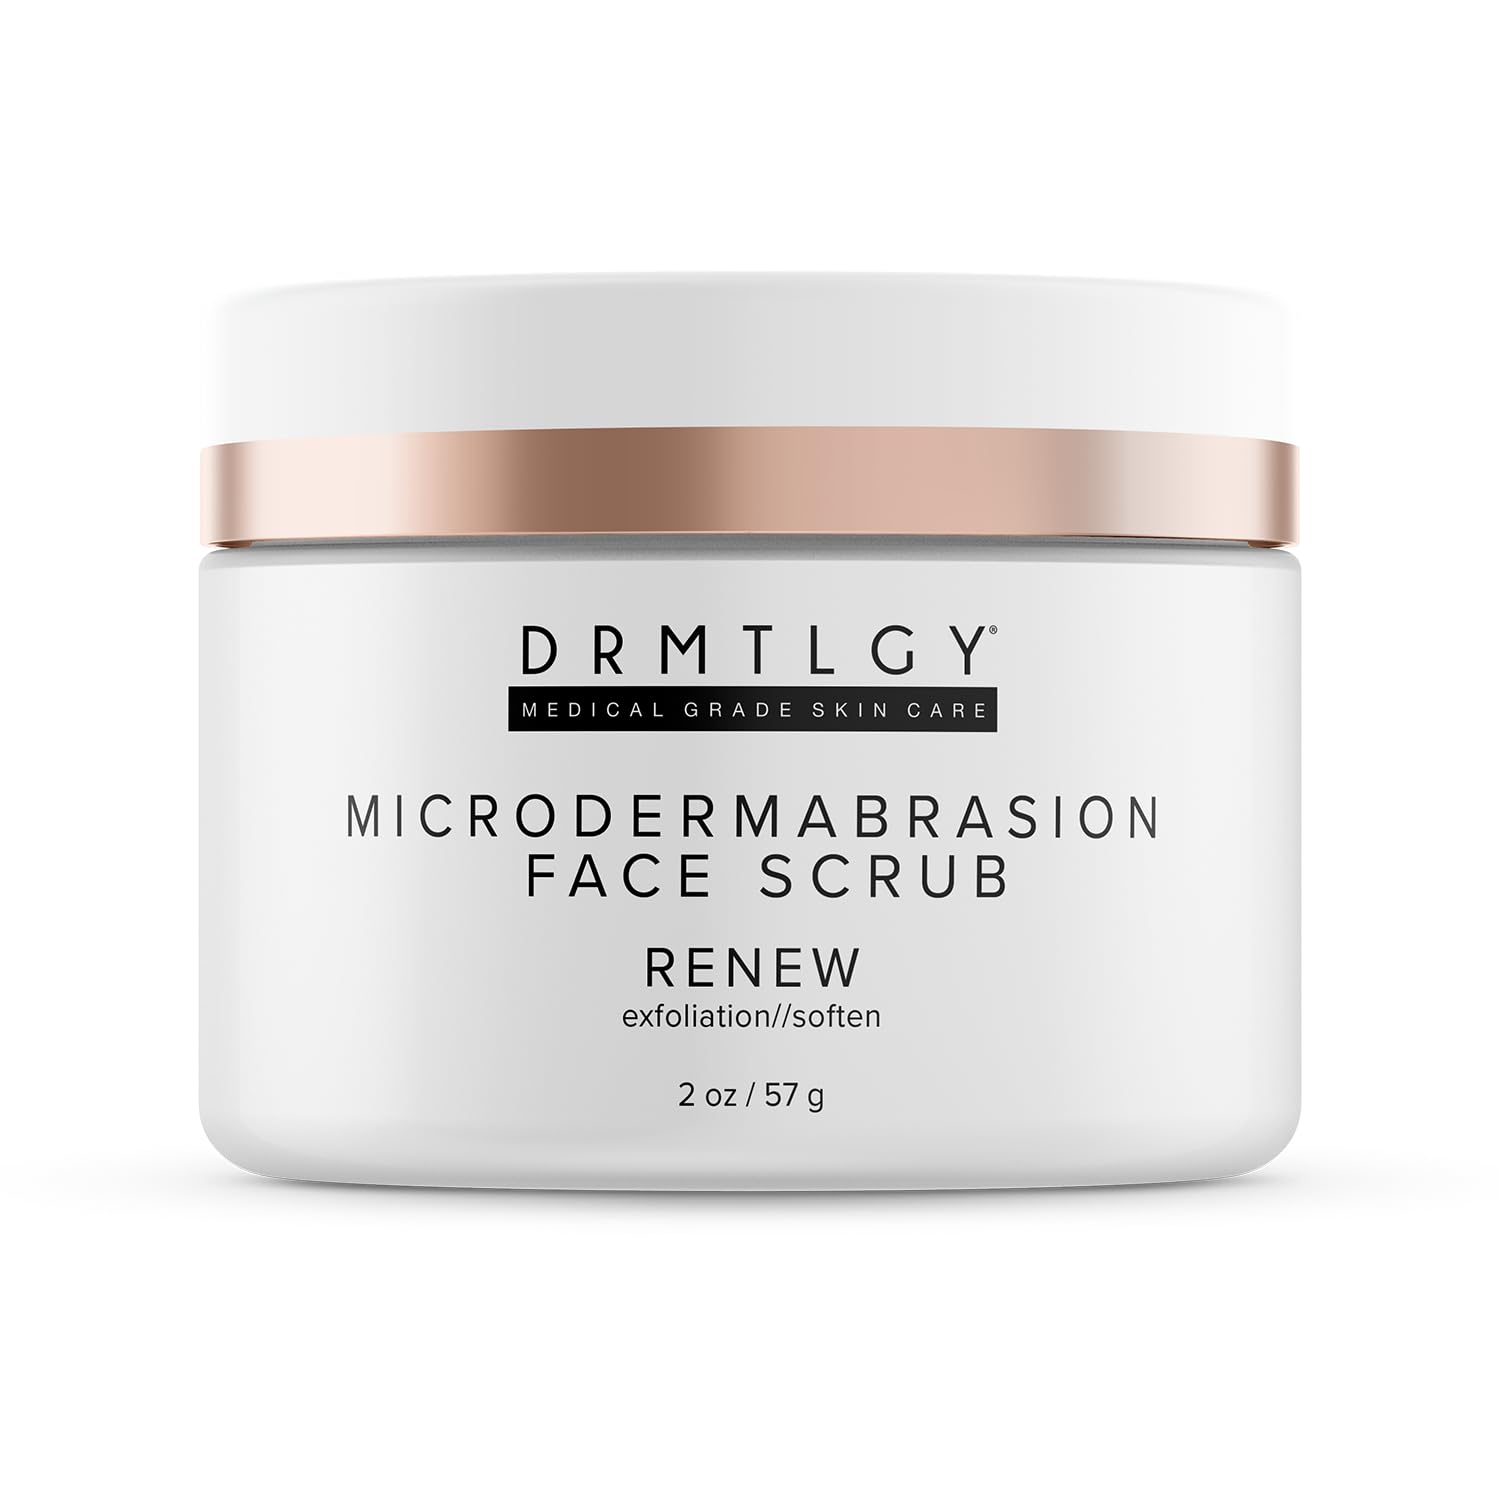 DRMTLGY Microdermabrasion Facial Scrub and Face Mask